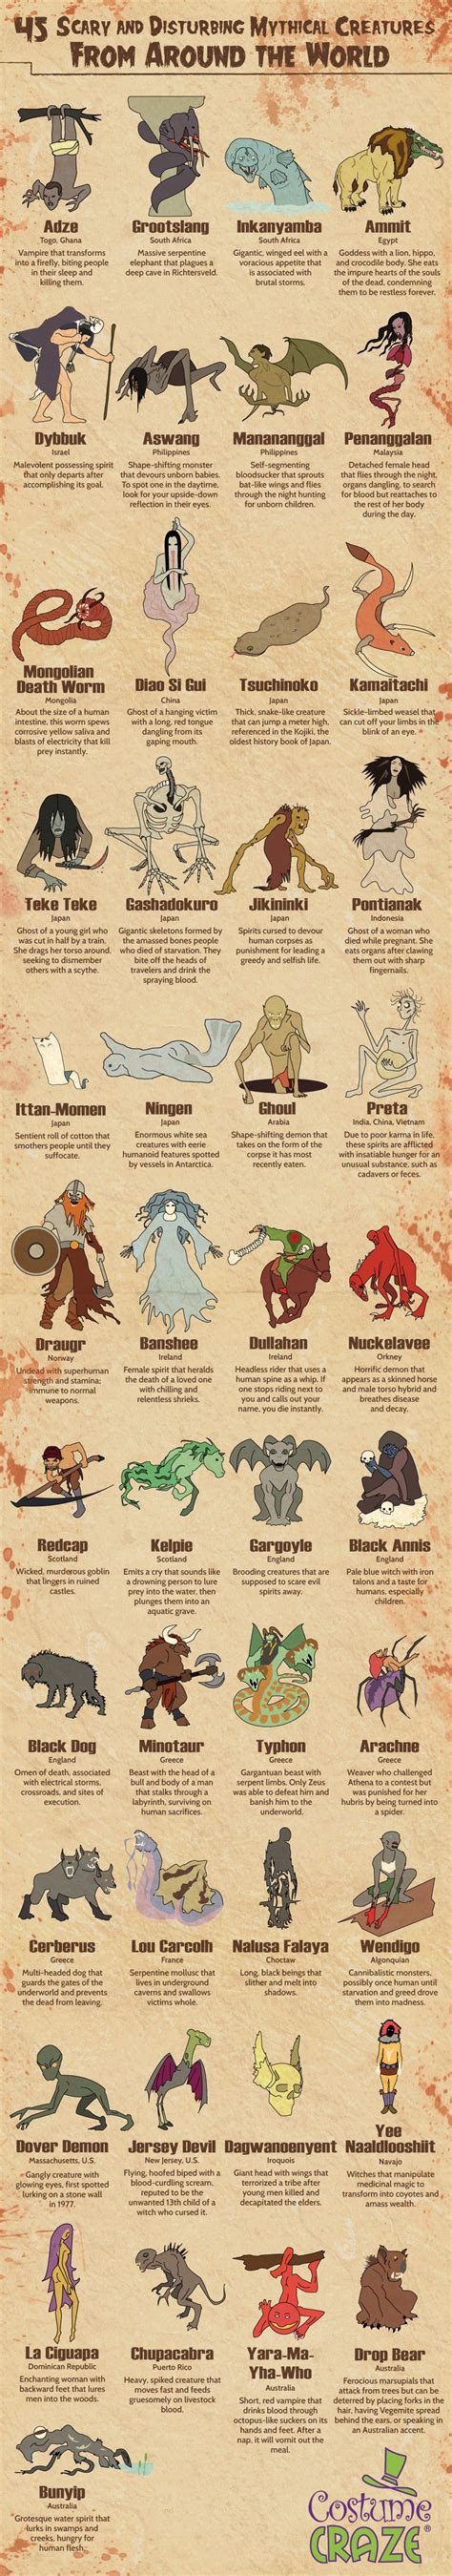 The Coolest And Most Disturbing Mythical Creatures Around The World